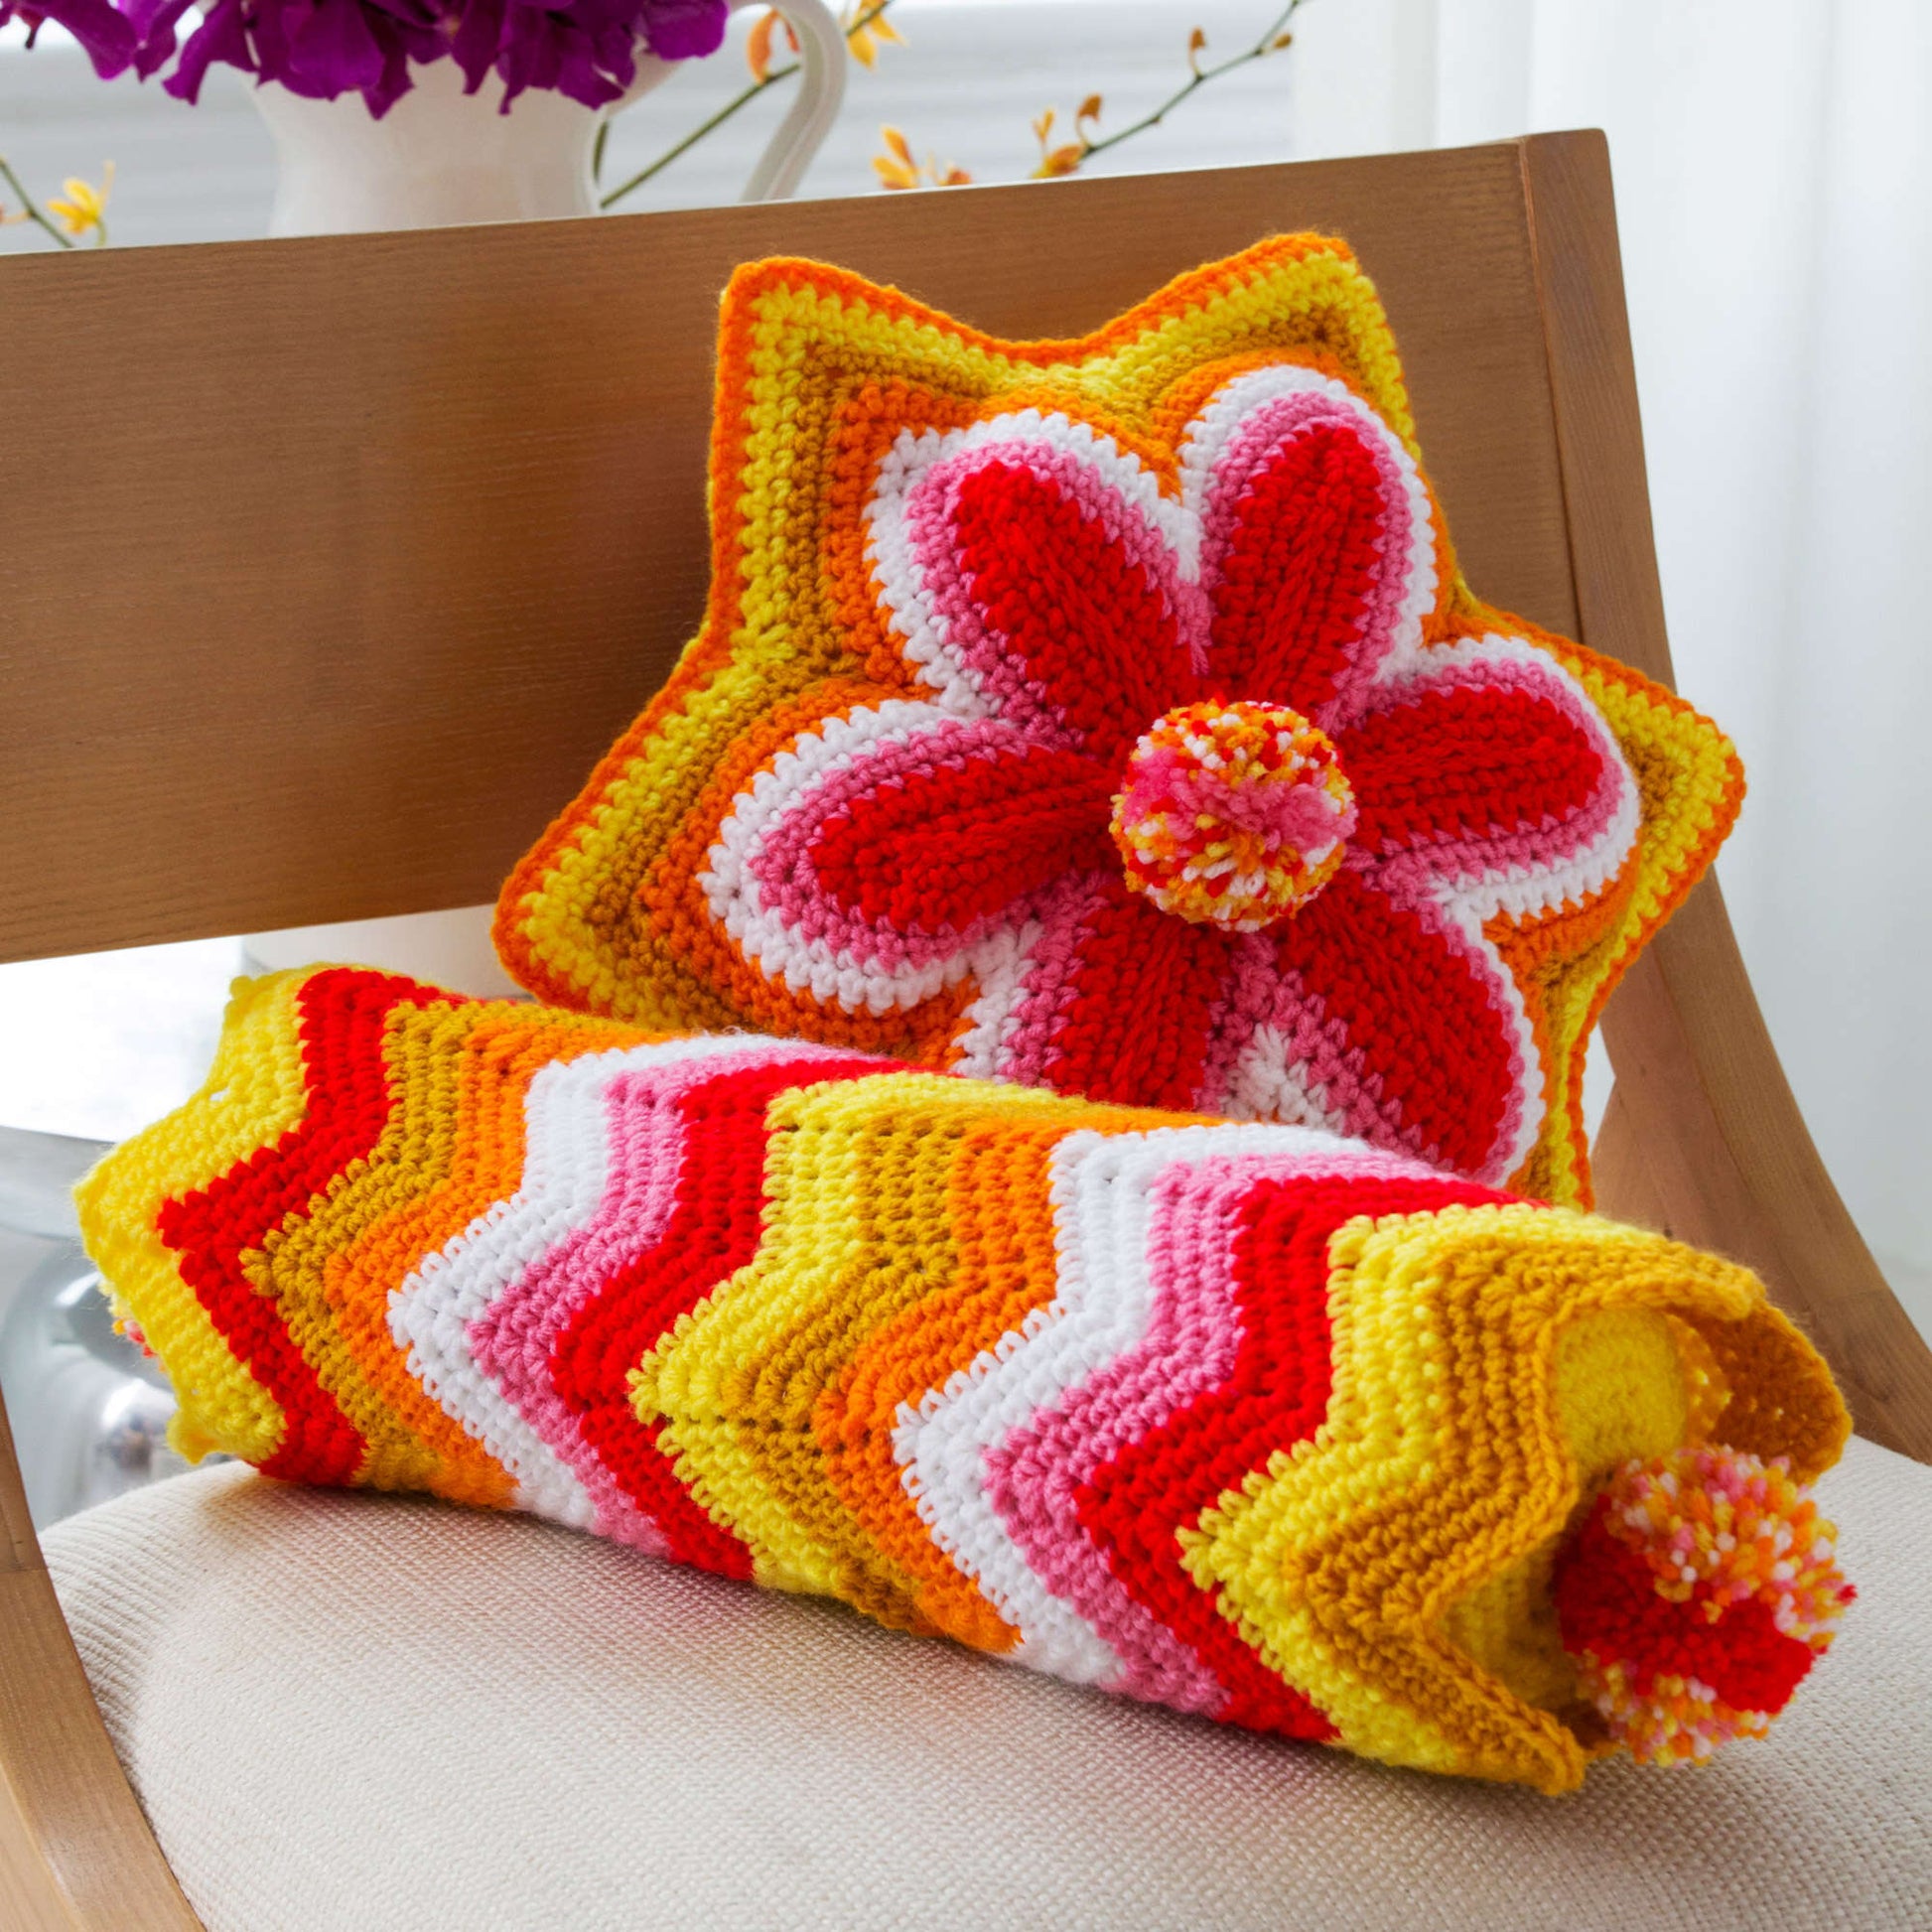 Free Red Heart Crochet Brighter Days Pillows Pattern